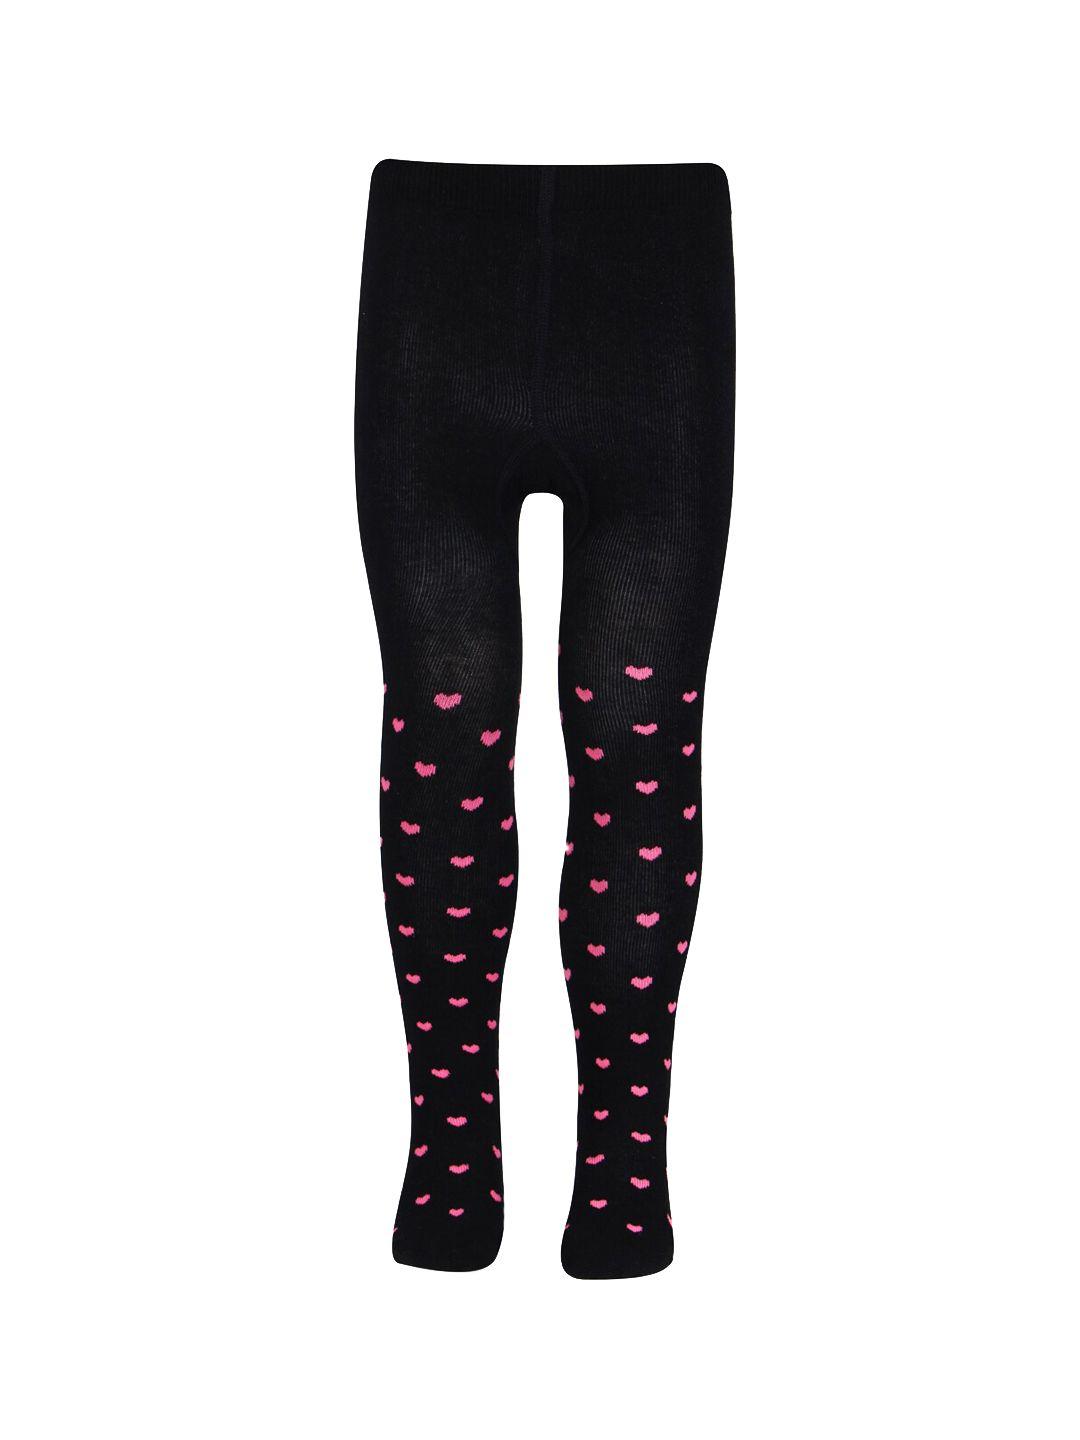 bonjour kids printed cotton tights with attached stockings